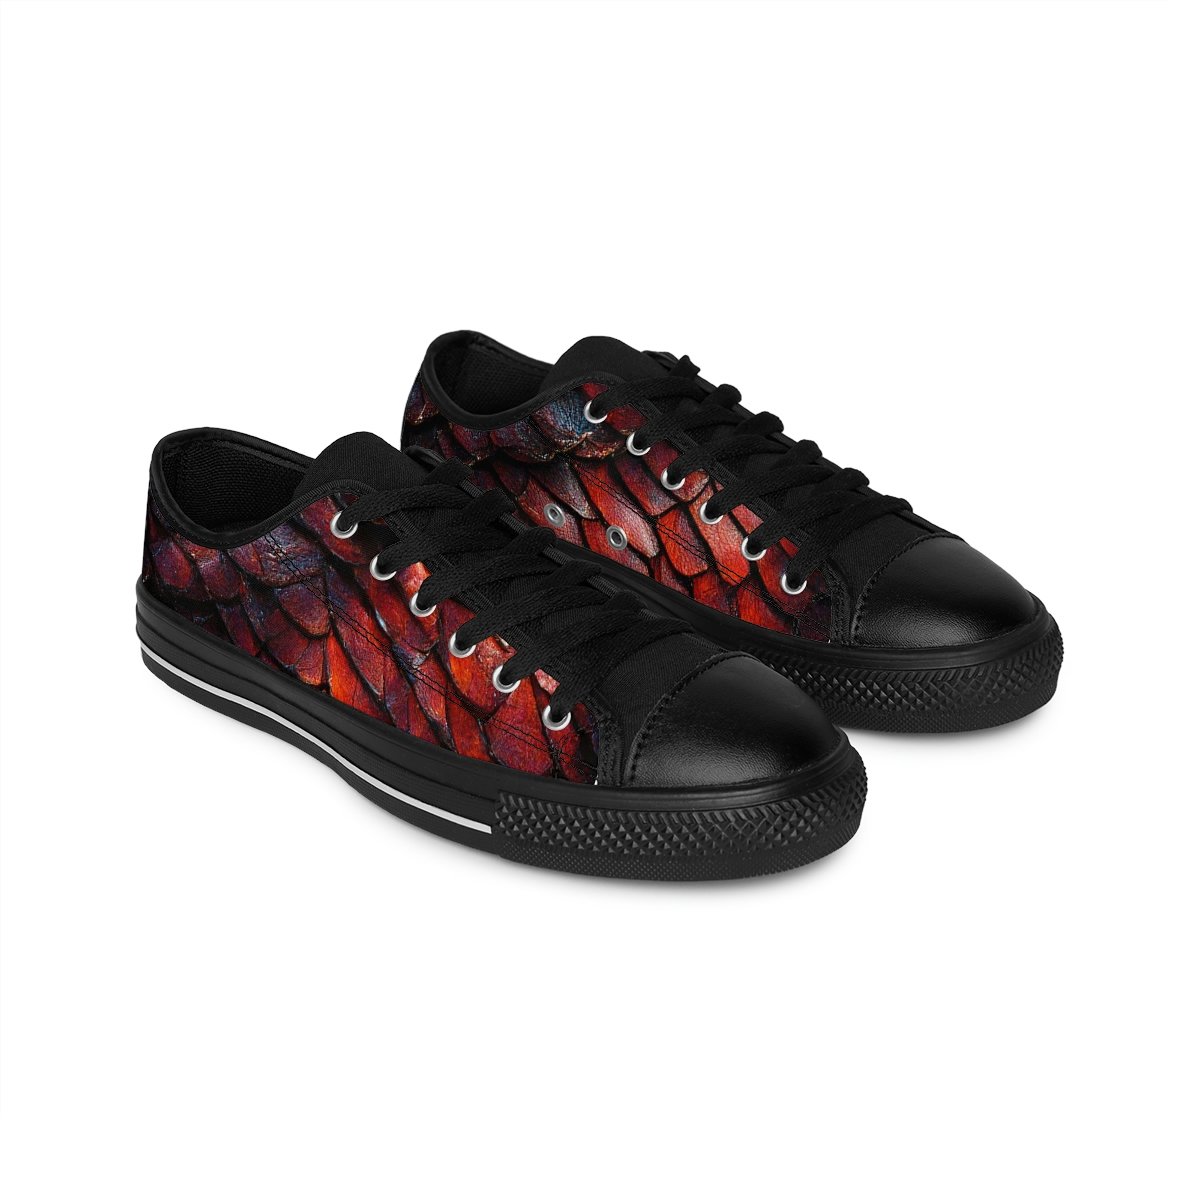 Excited to share the latest addition to my #etsy shop: Red Dragon scale Men's Sneakers etsy.me/3DXkZ06 #black #red #dragonscales #popart #shoes #sneakers #giftsforhim #menssneakers #dragonsneakers